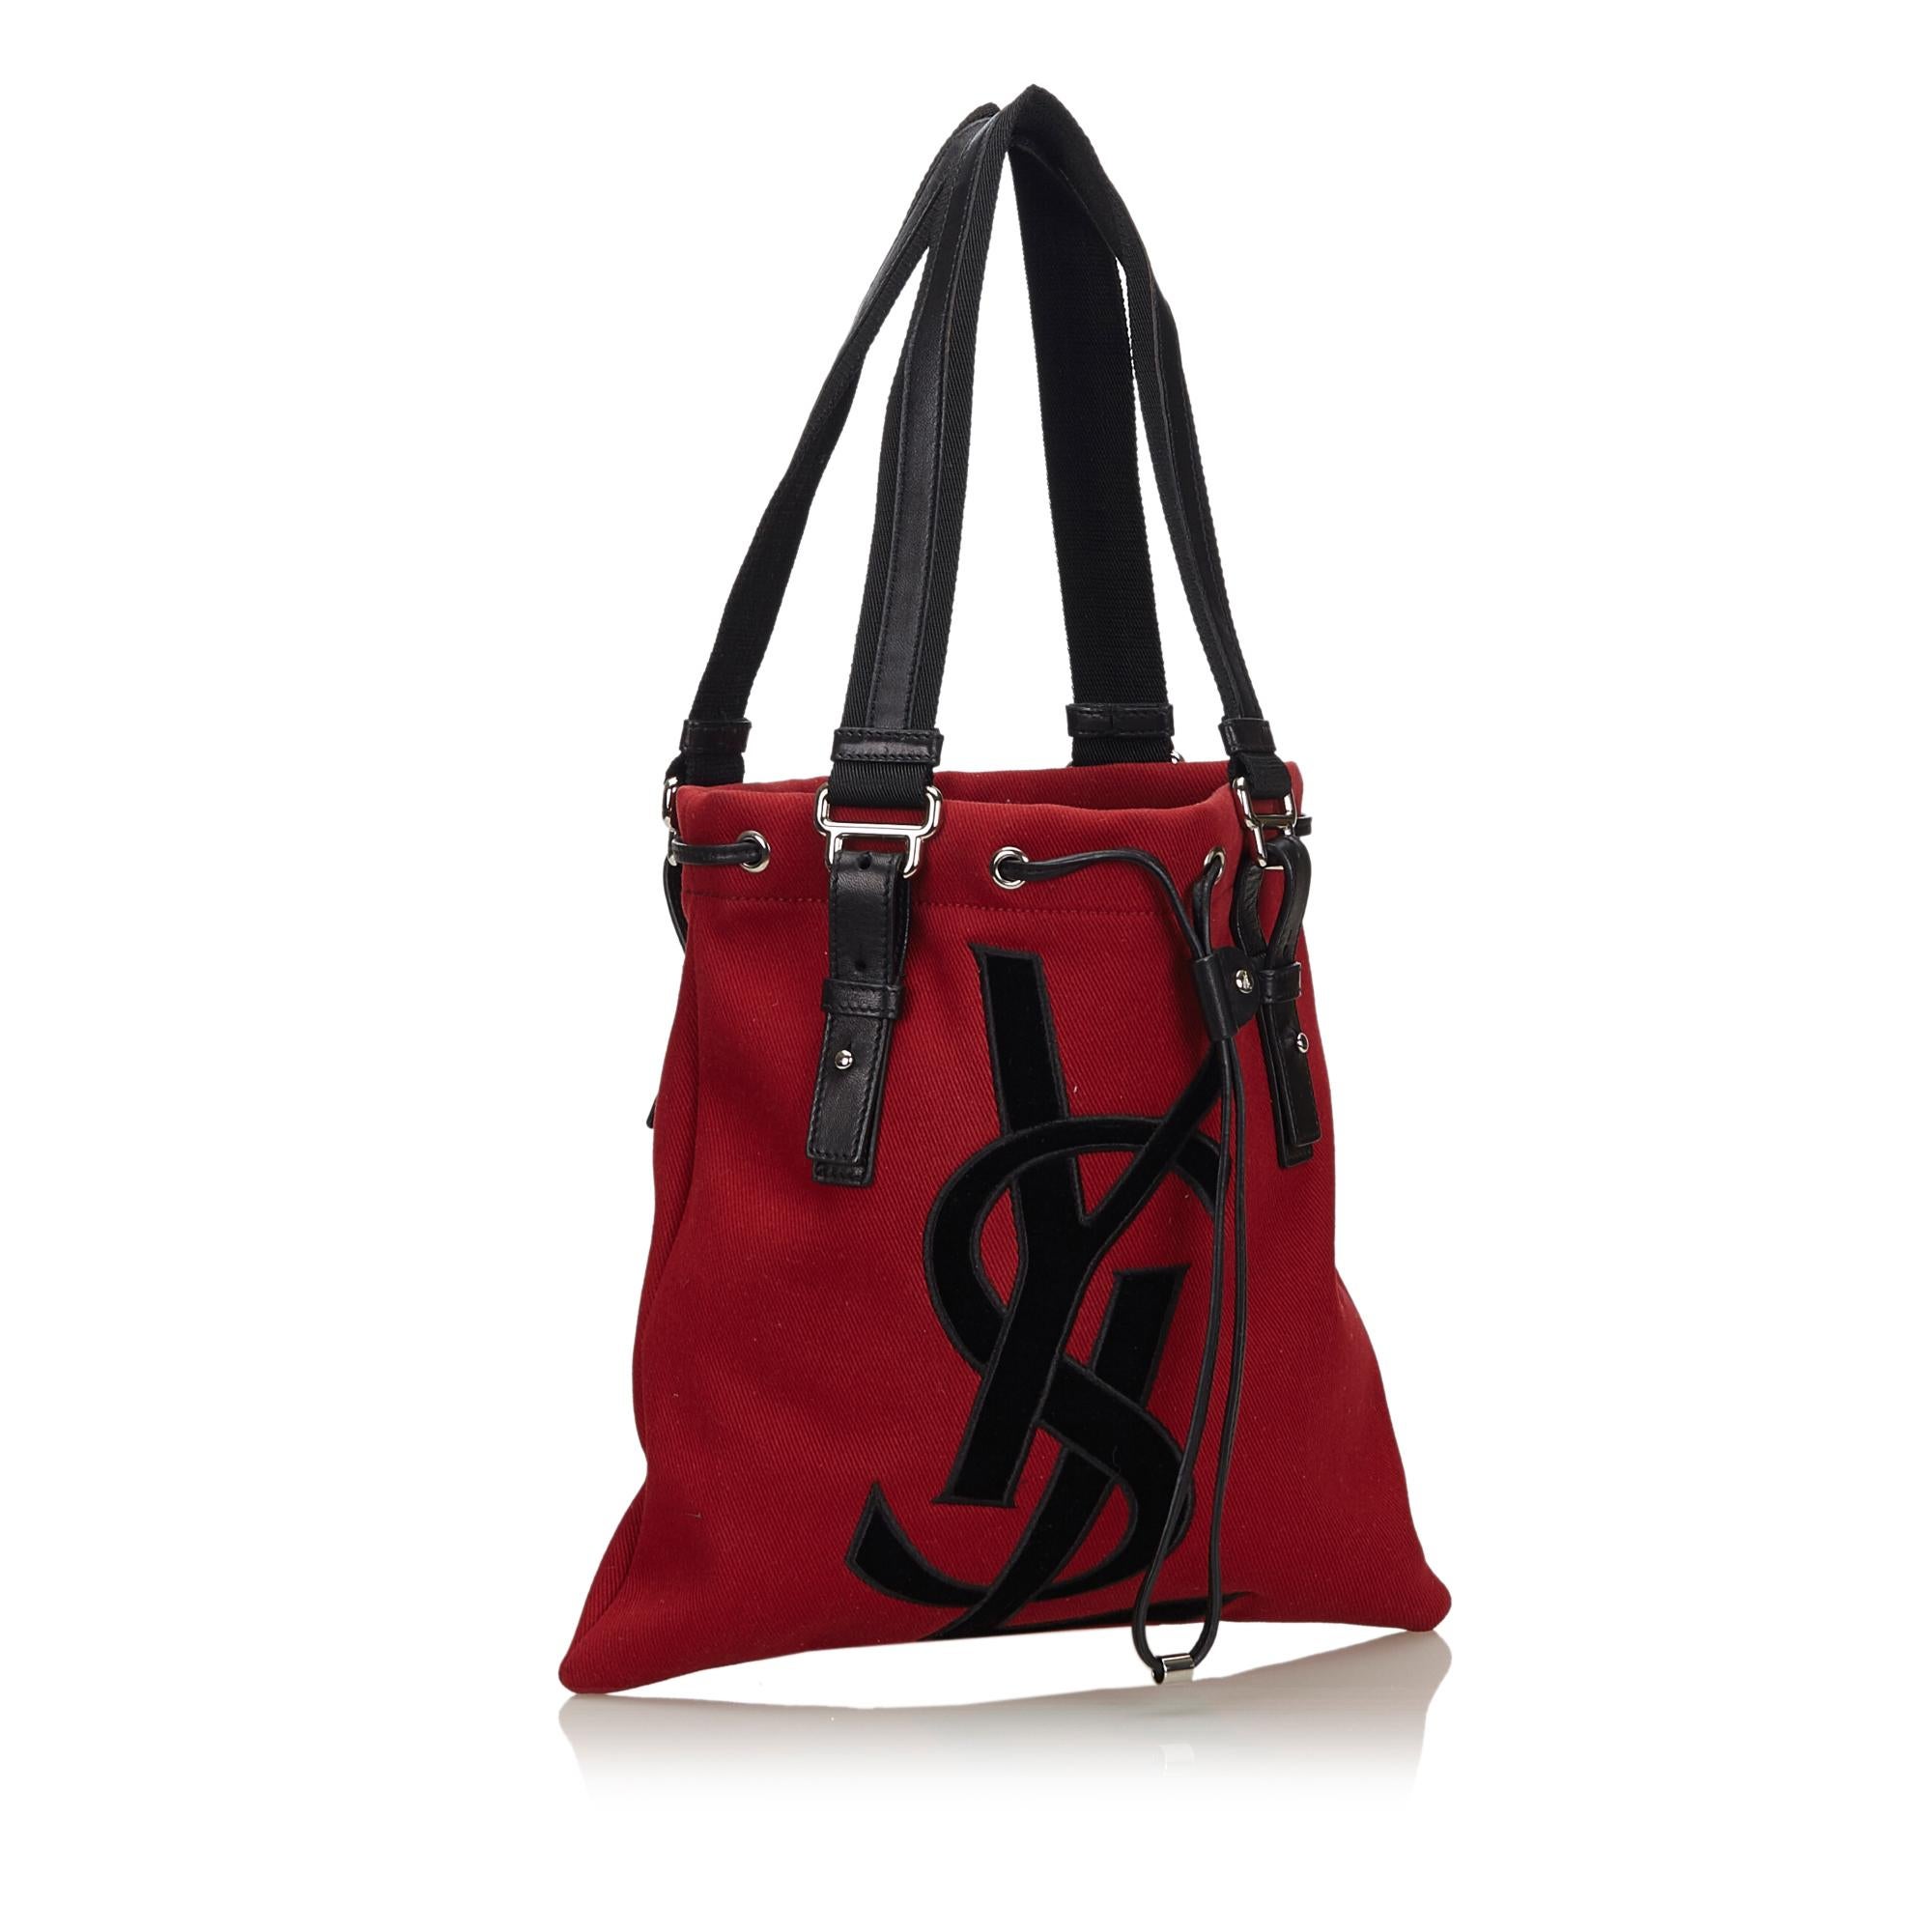 The Kahala tote bag features a canvas body, flat straps with leather details, a top drawstring closure, and an interior zip pocket. It carries as AB condition rating.

Inclusions: 
Dust Bag

Dimensions:
Length: 29.00 cm
Width: 28.00 cm
Depth: 2.00